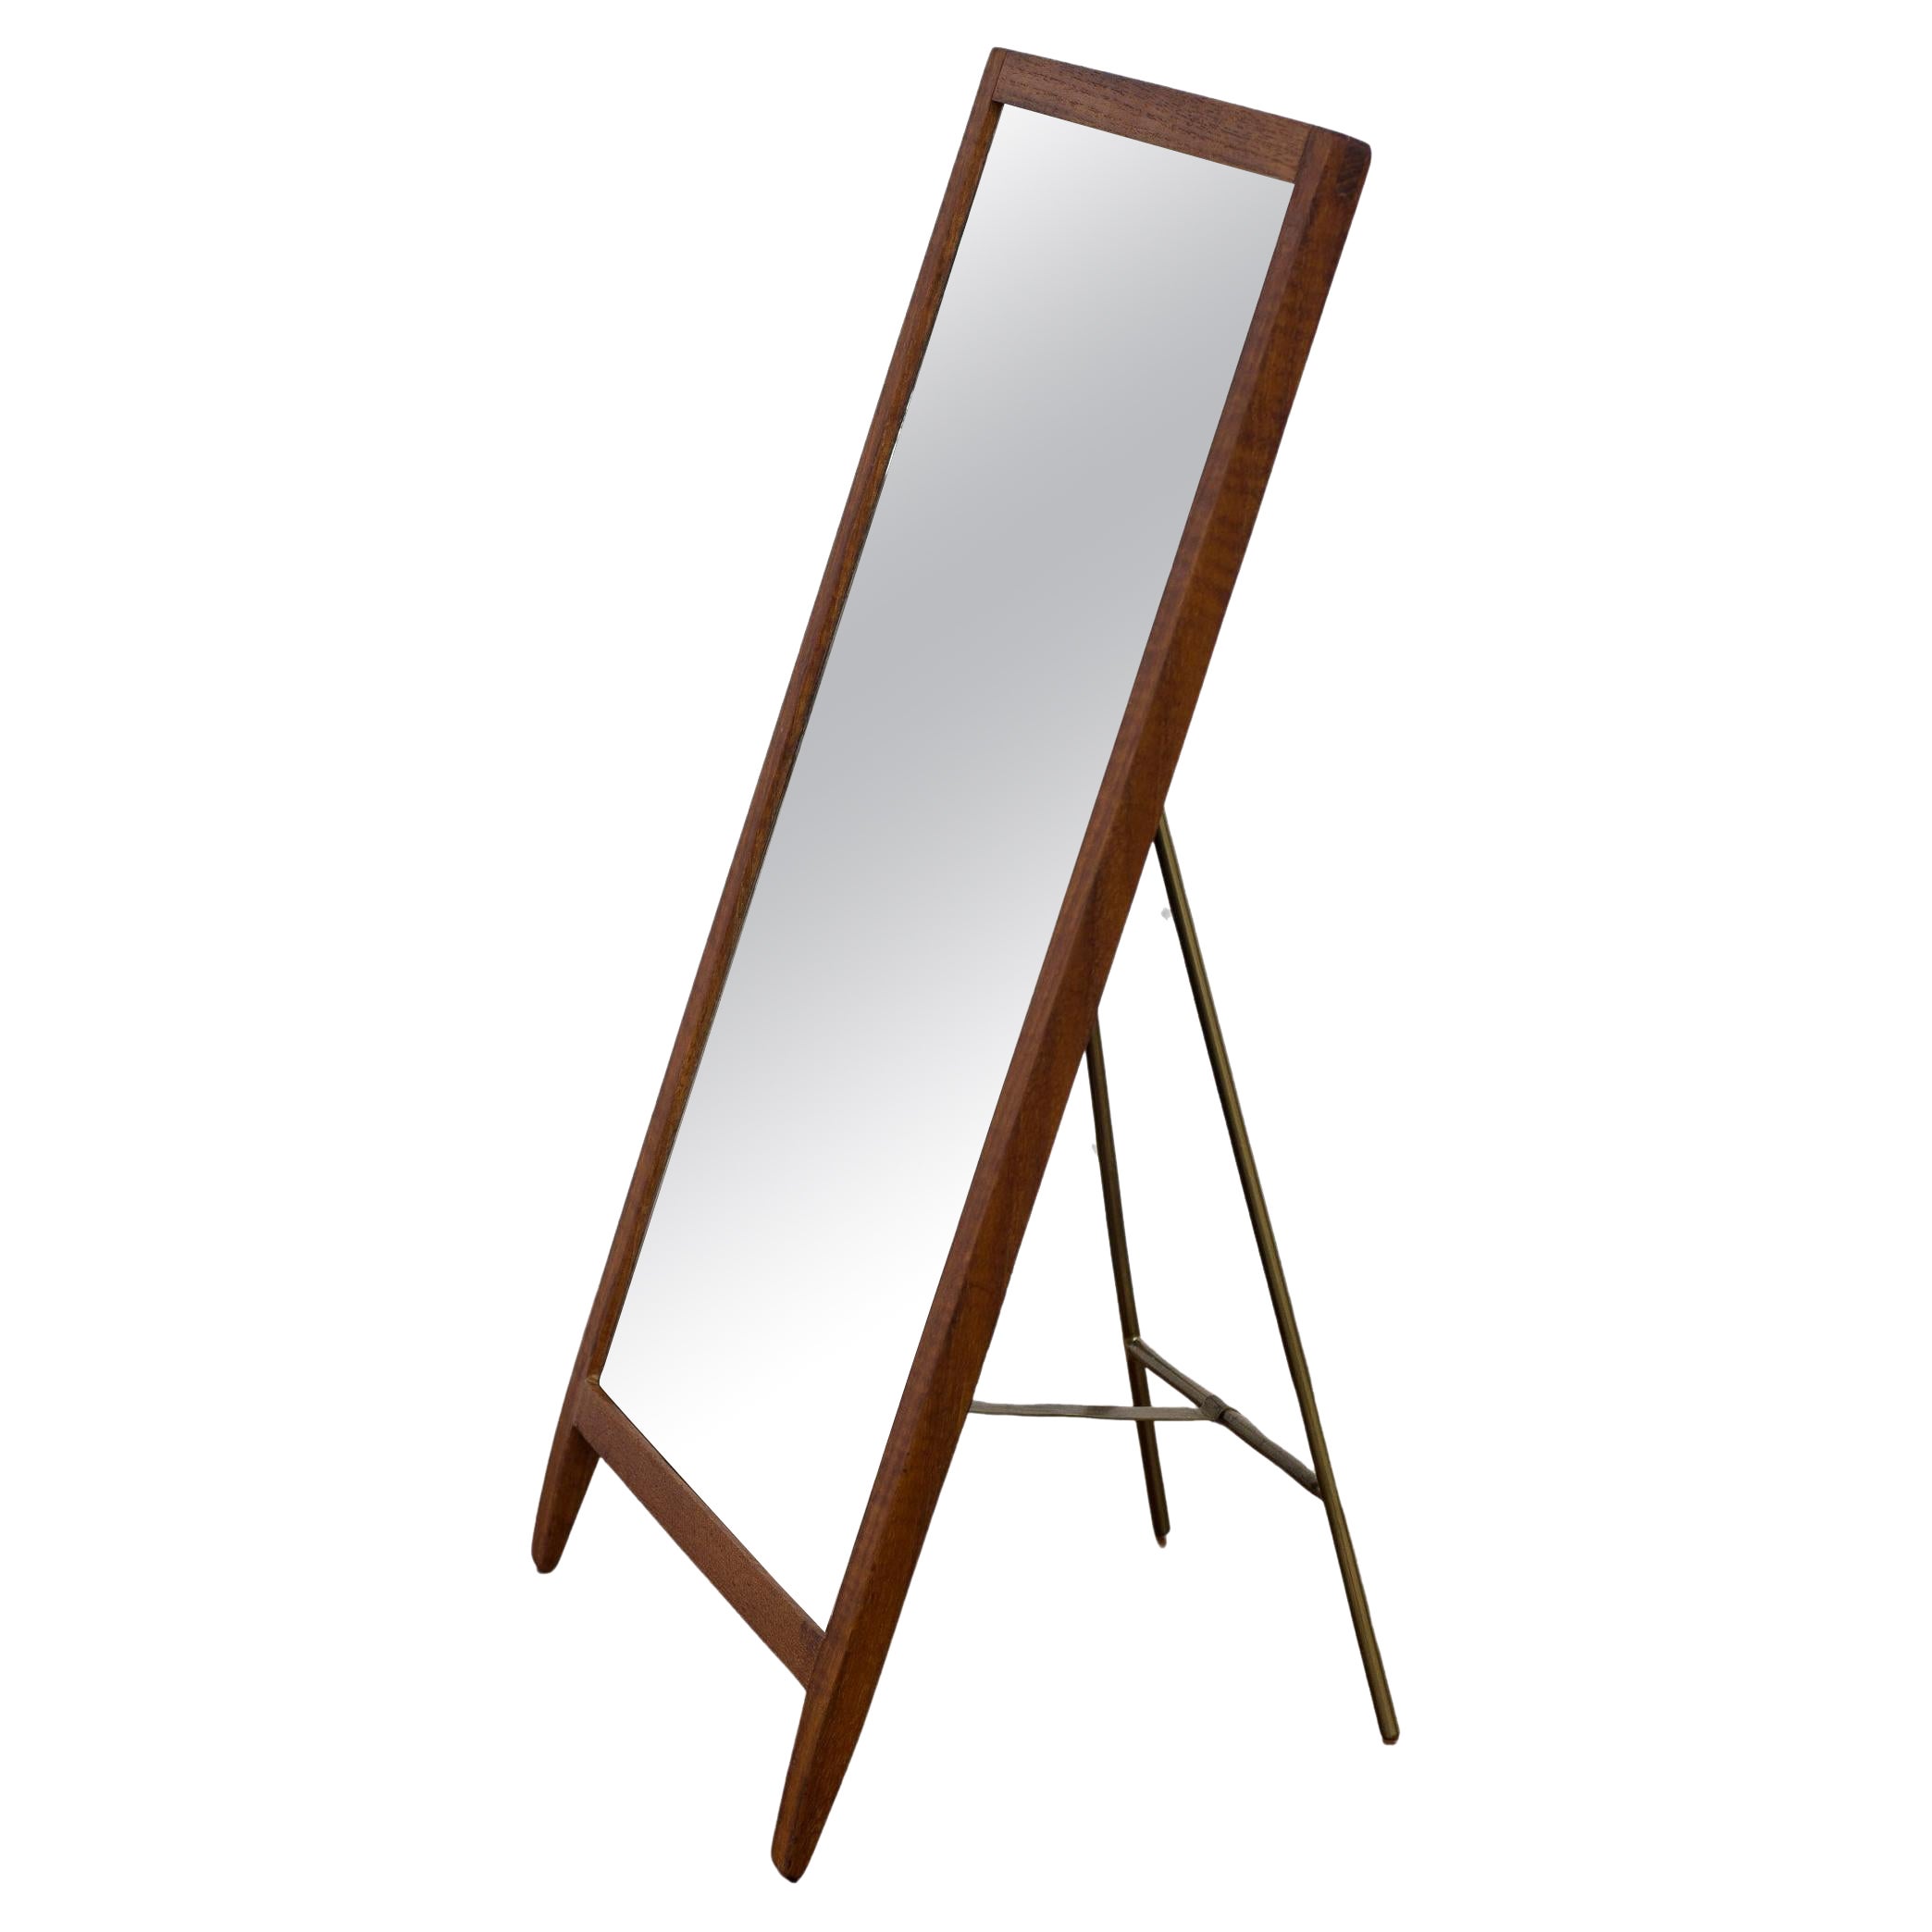 Table mirror in teak and brass by Hans-Agne Jakobsson, Sweden, 1950s For Sale